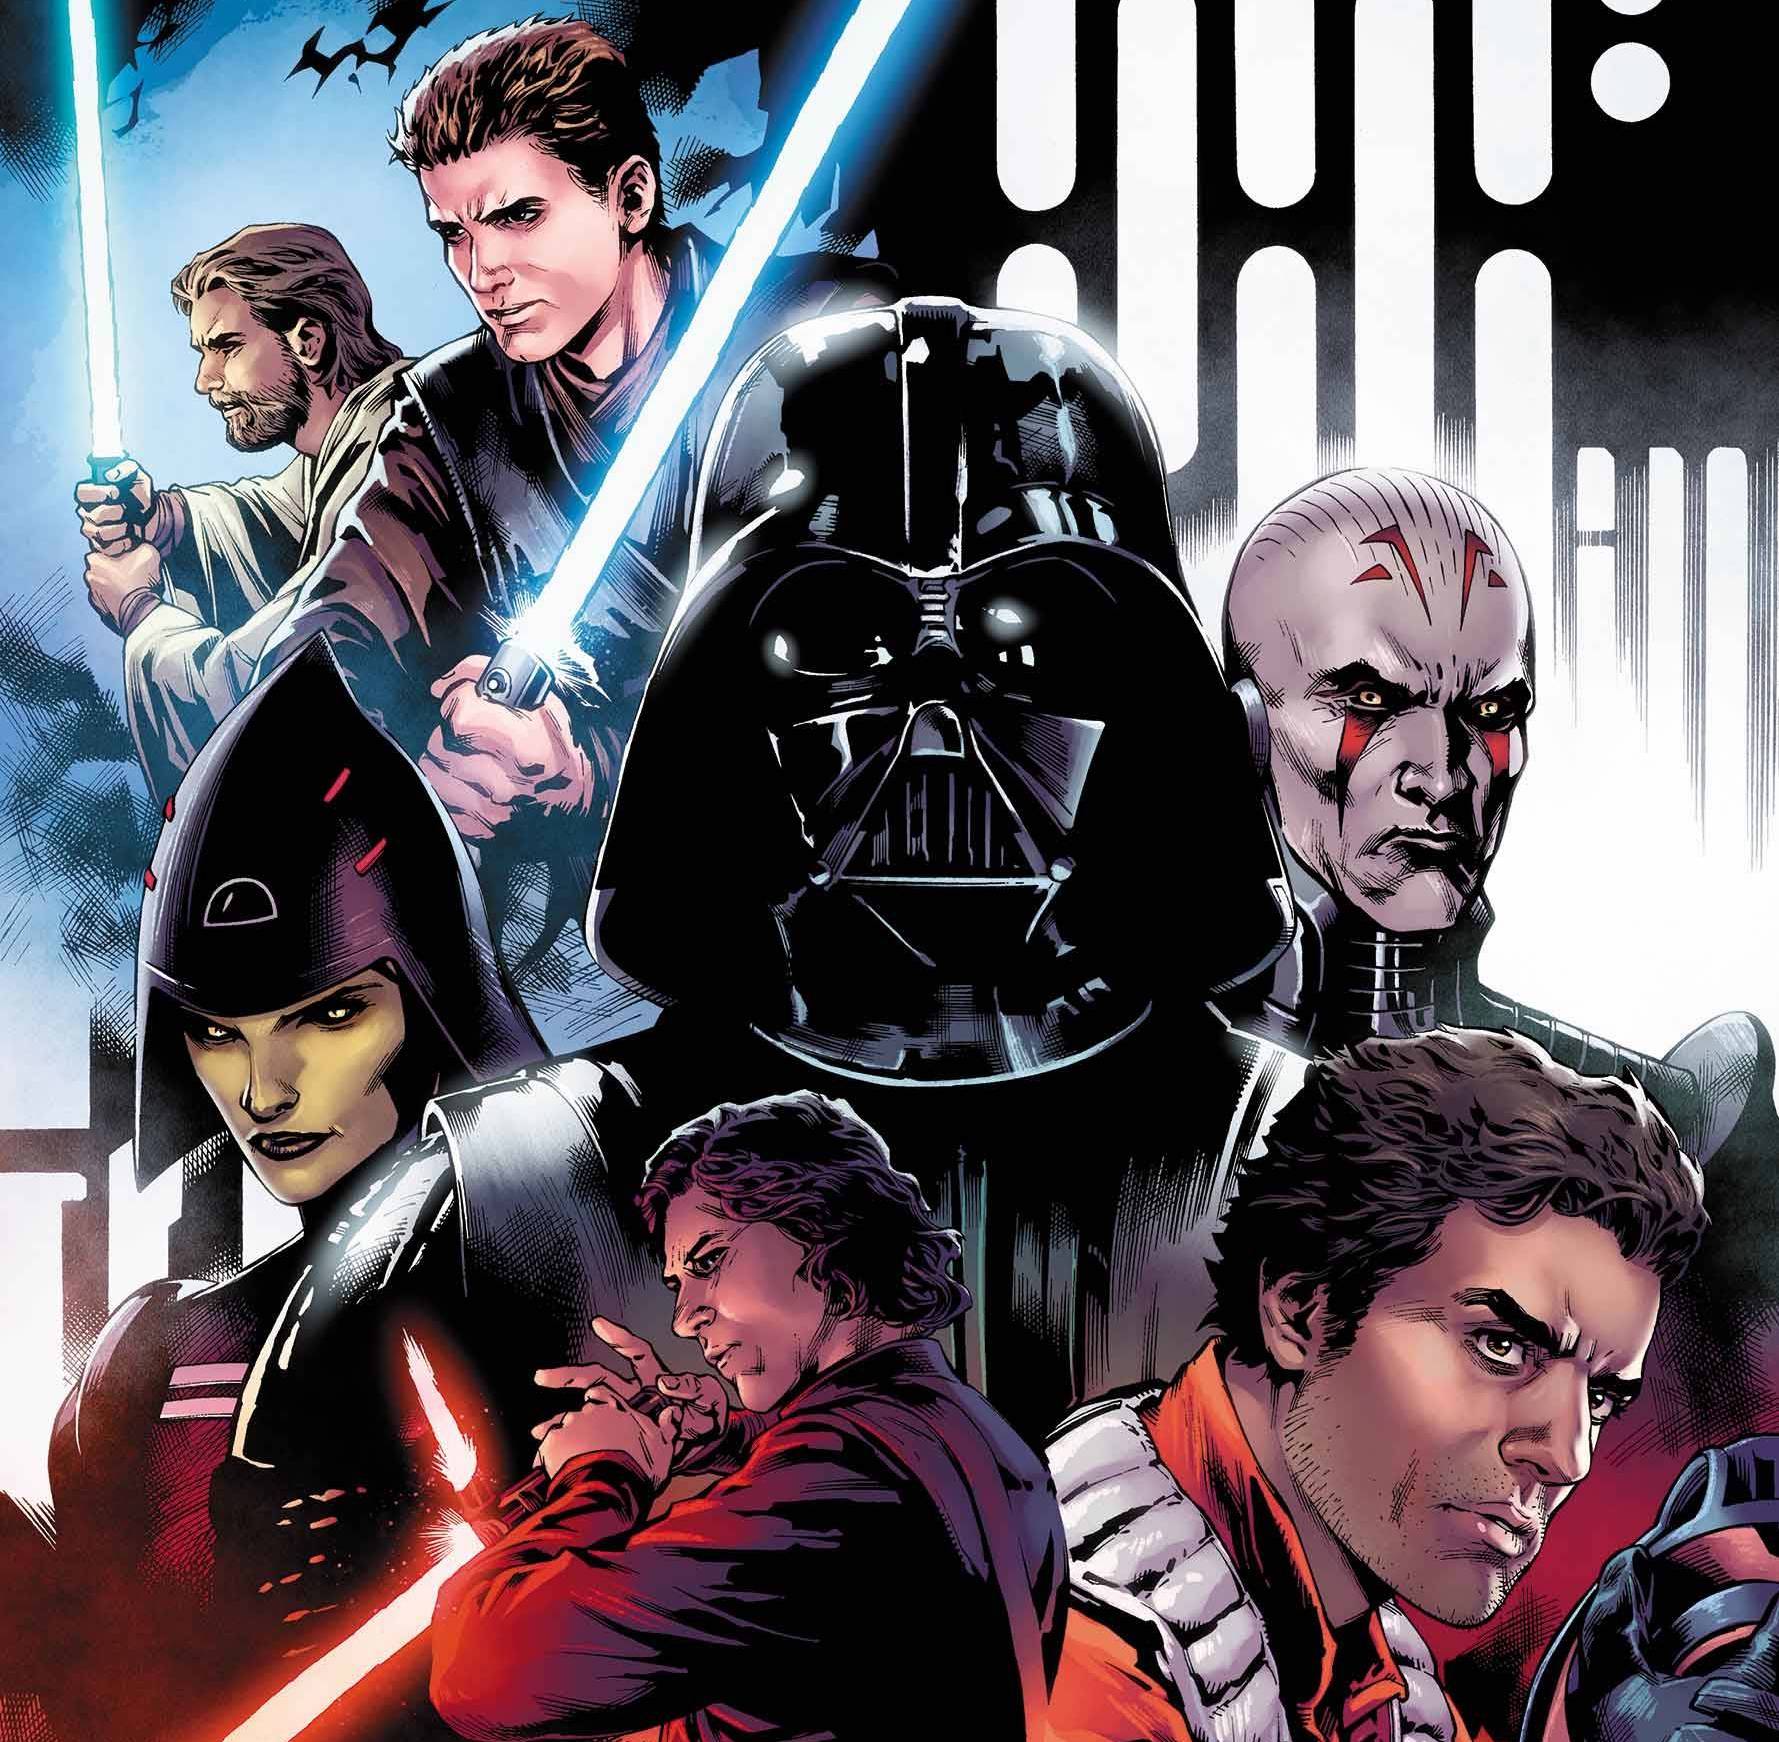 'Star Wars' #25 features two must-read lightsaber battles